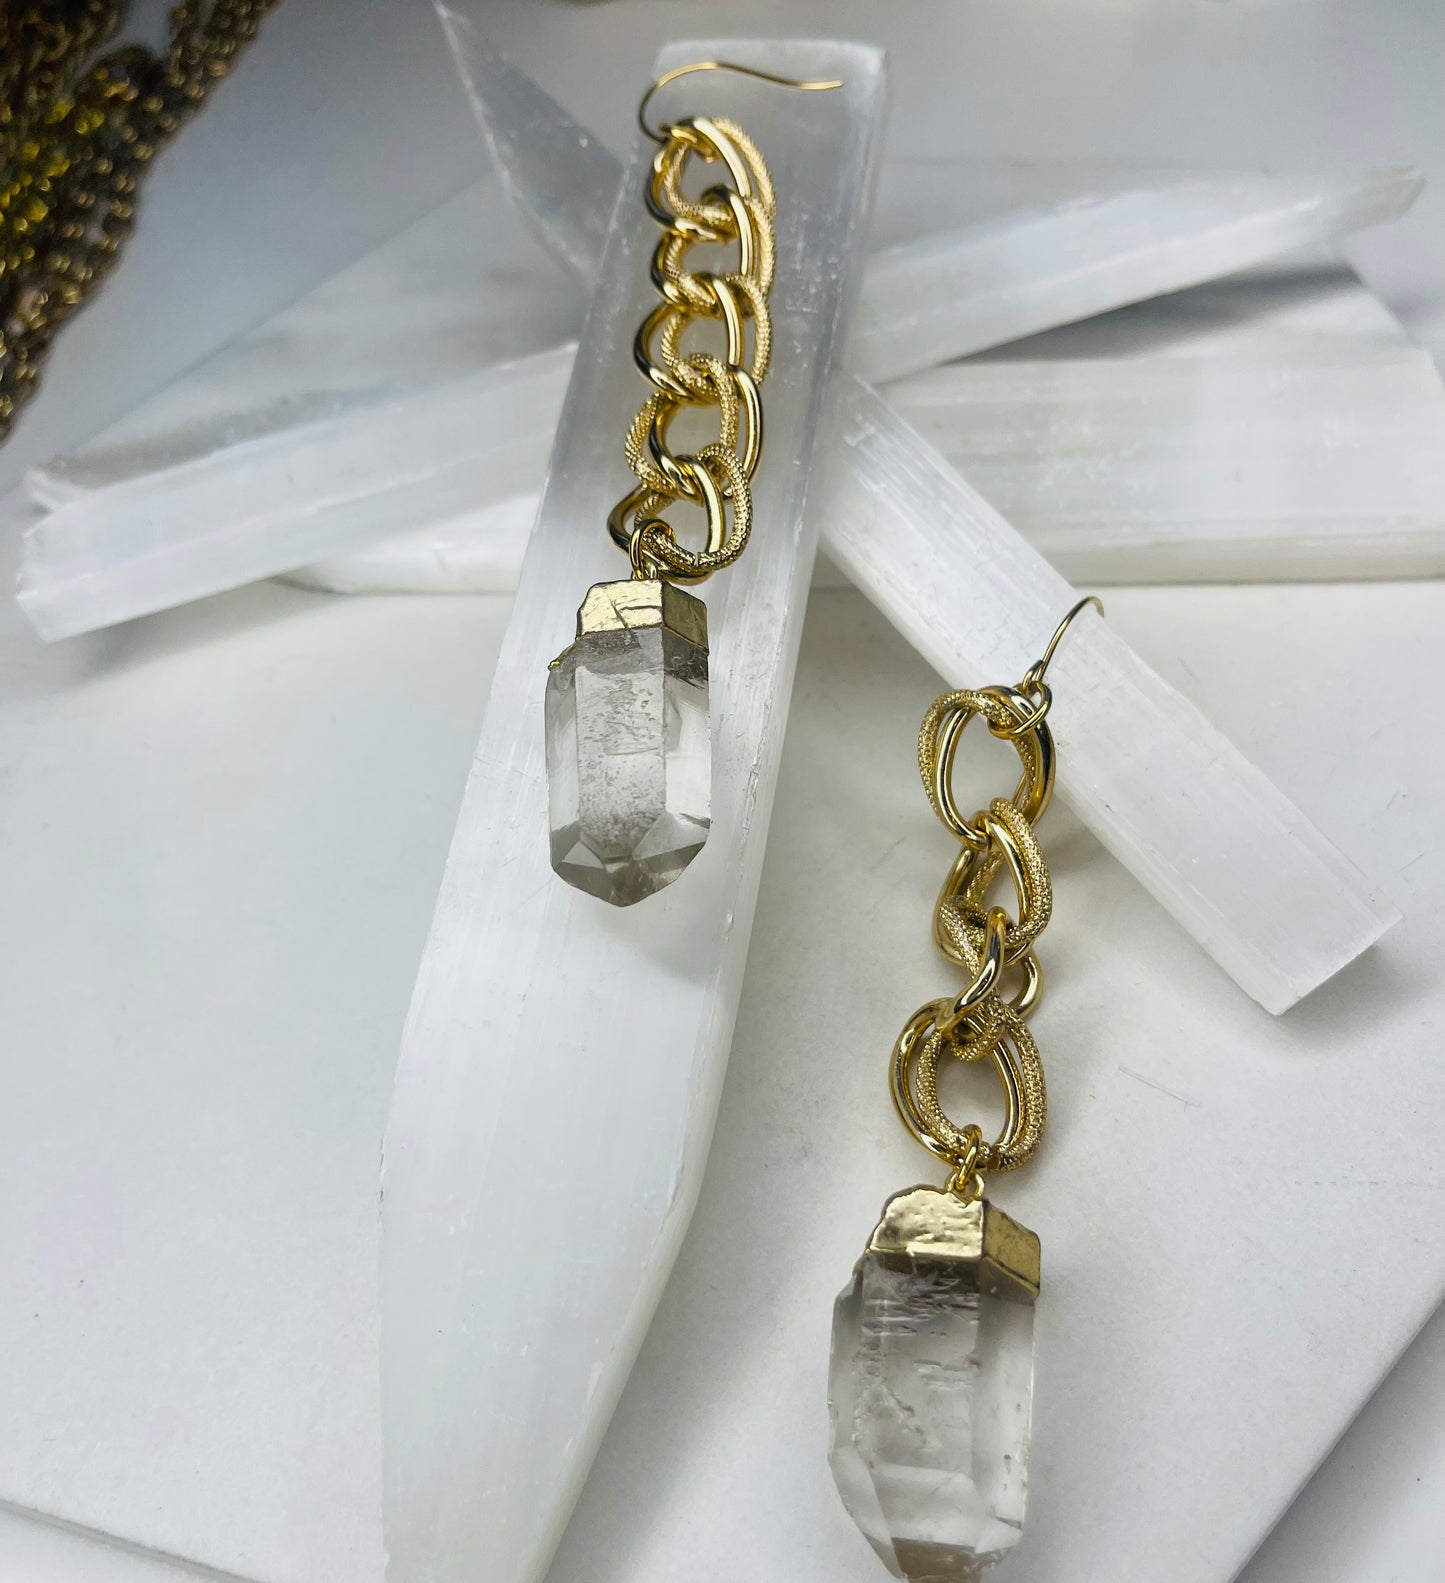 Clear Quartz Chakra Soul Chains Earrings w 24K Electroplated Gold Clear Quartz Crystals